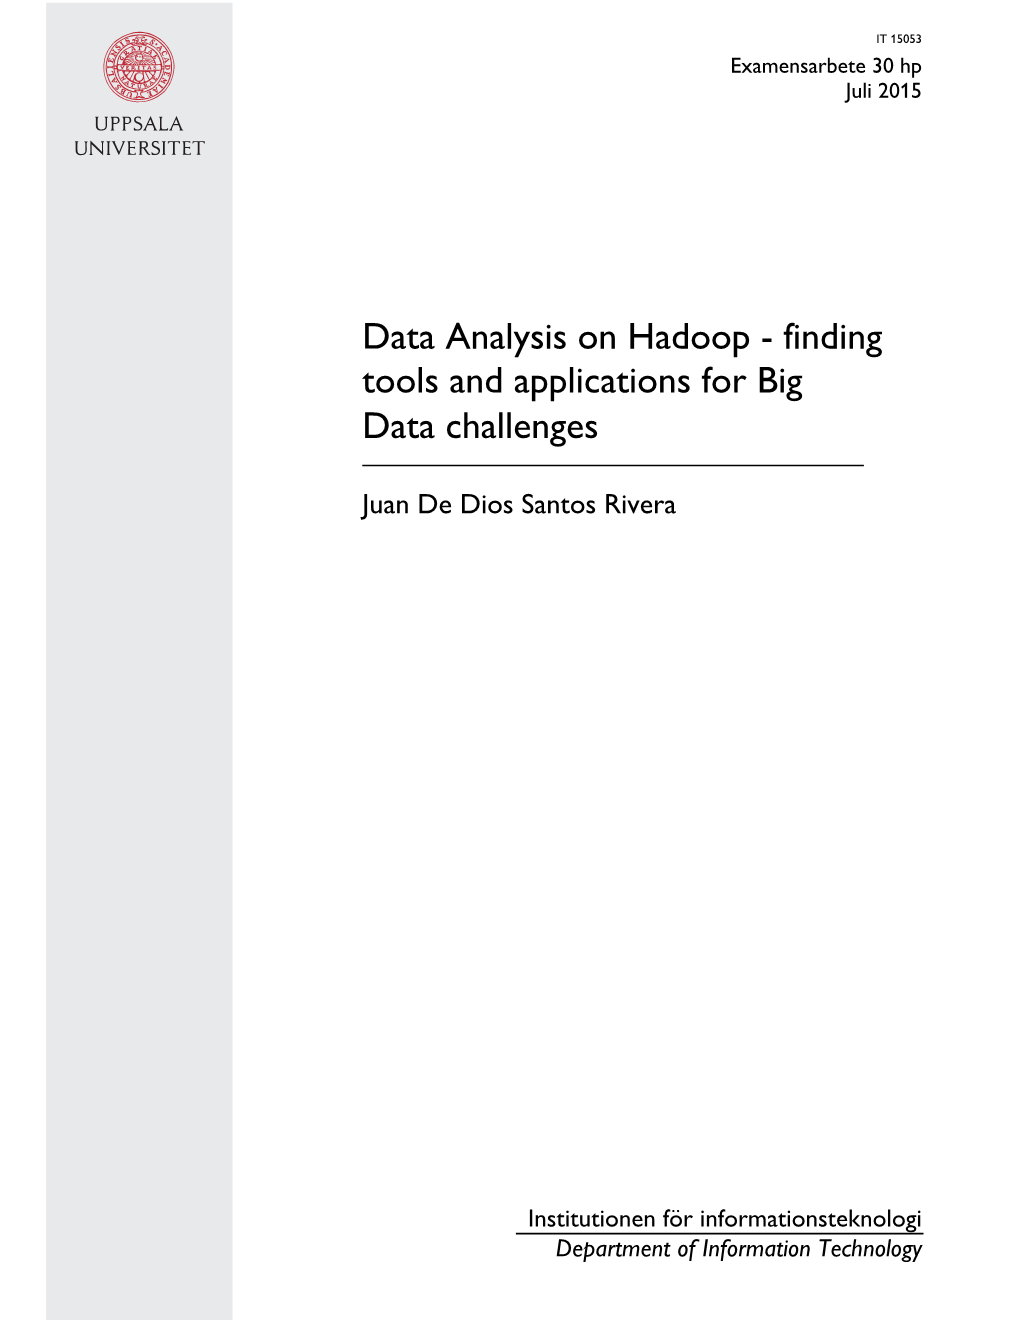 Data Analysis on Hadoop - Finding Tools and Applications for Big Data Challenges